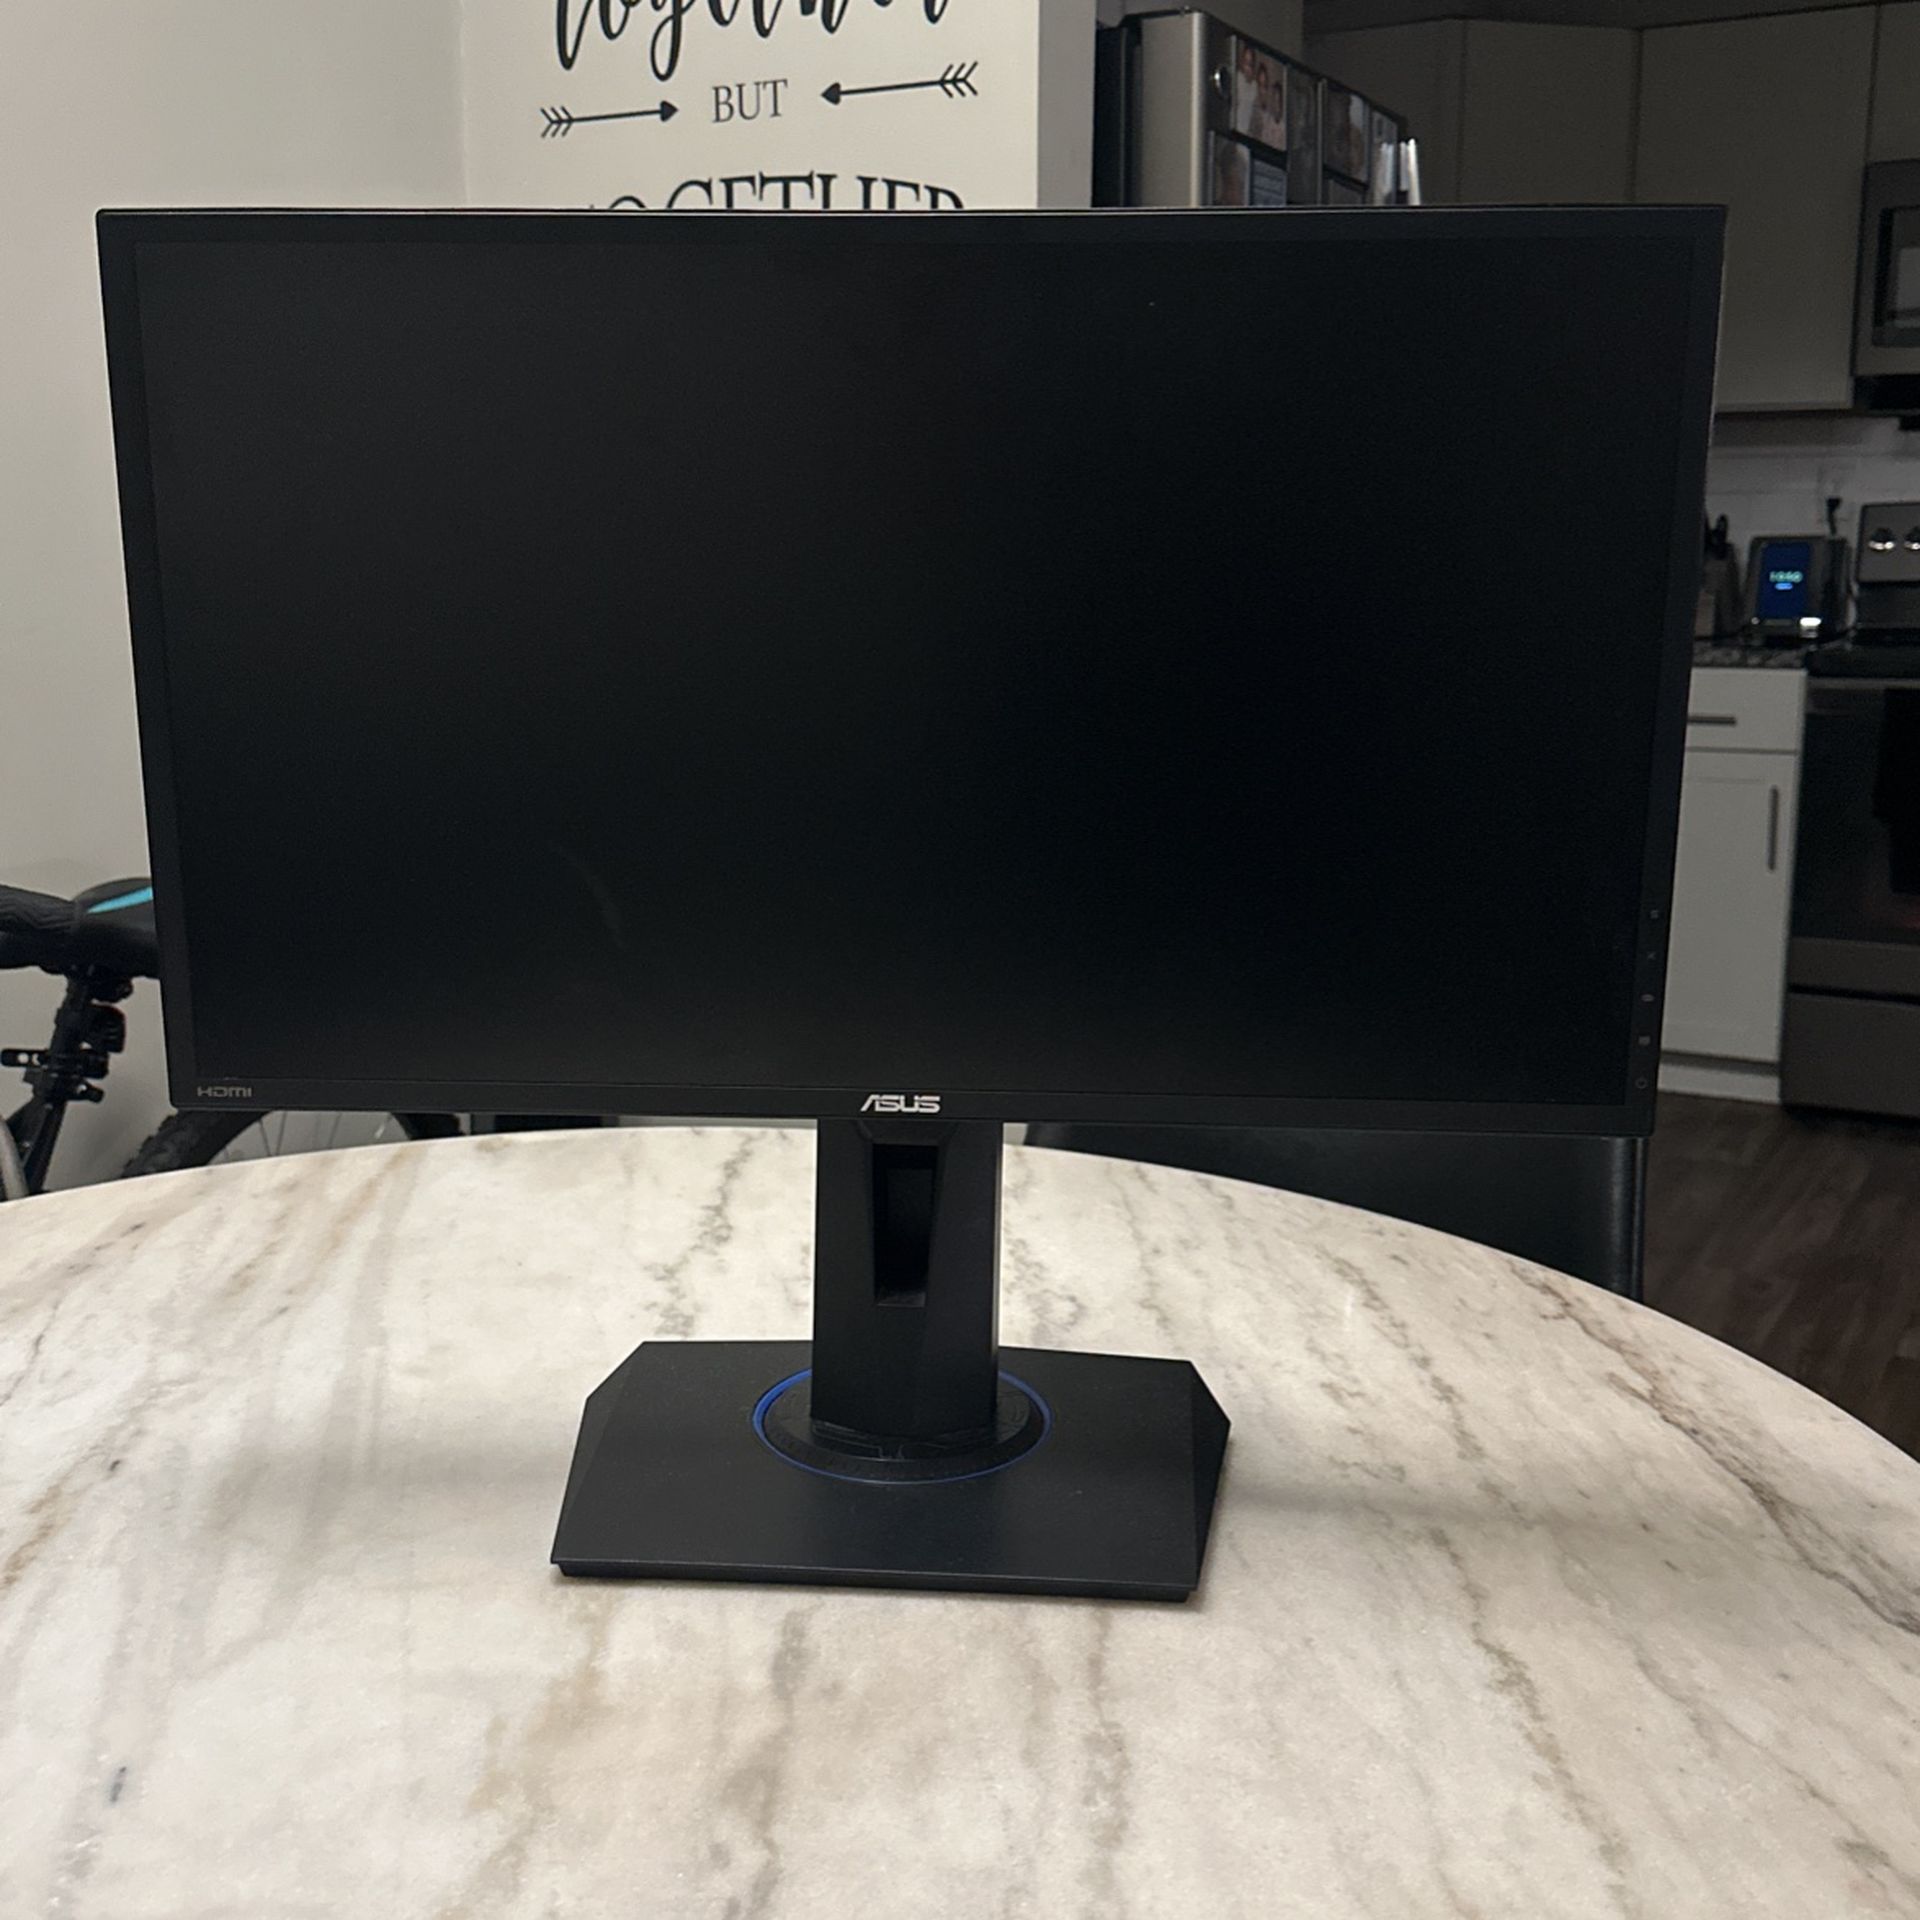 ASUS 60hz Monitor (used)